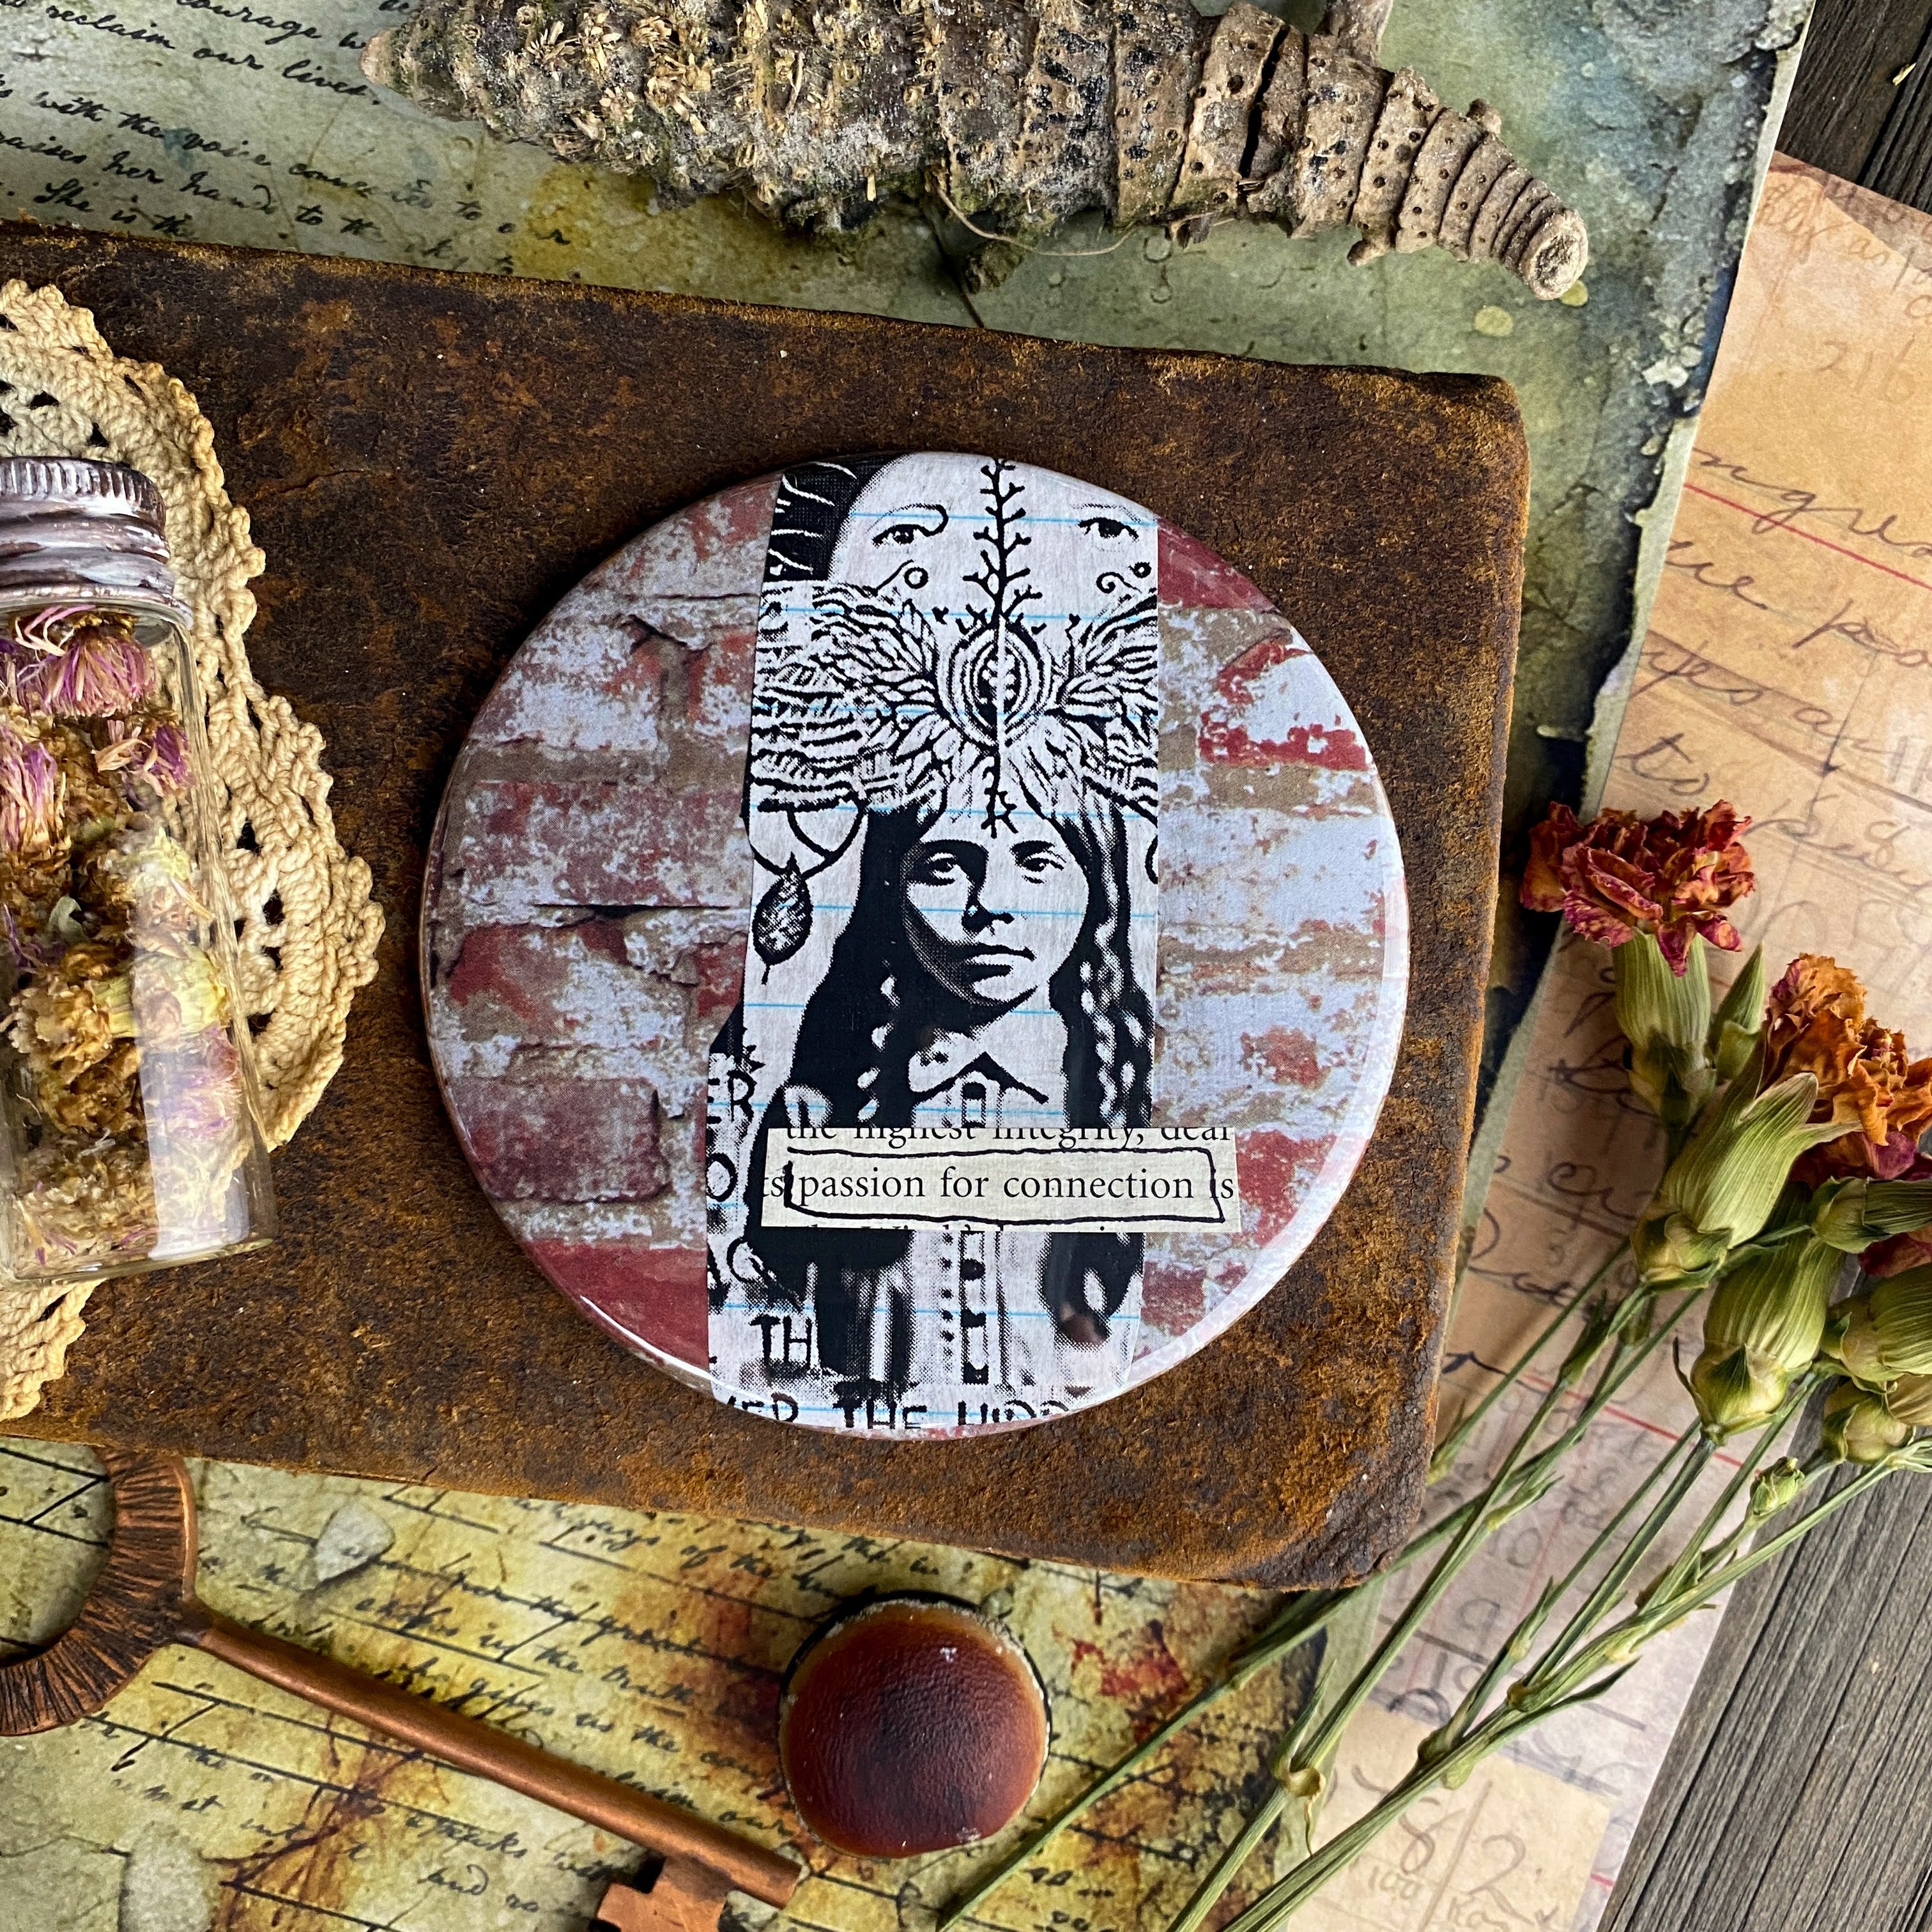 PASSION FOR CONNECTION - Hand Pressed Pocket Mirror with Original Collage Art